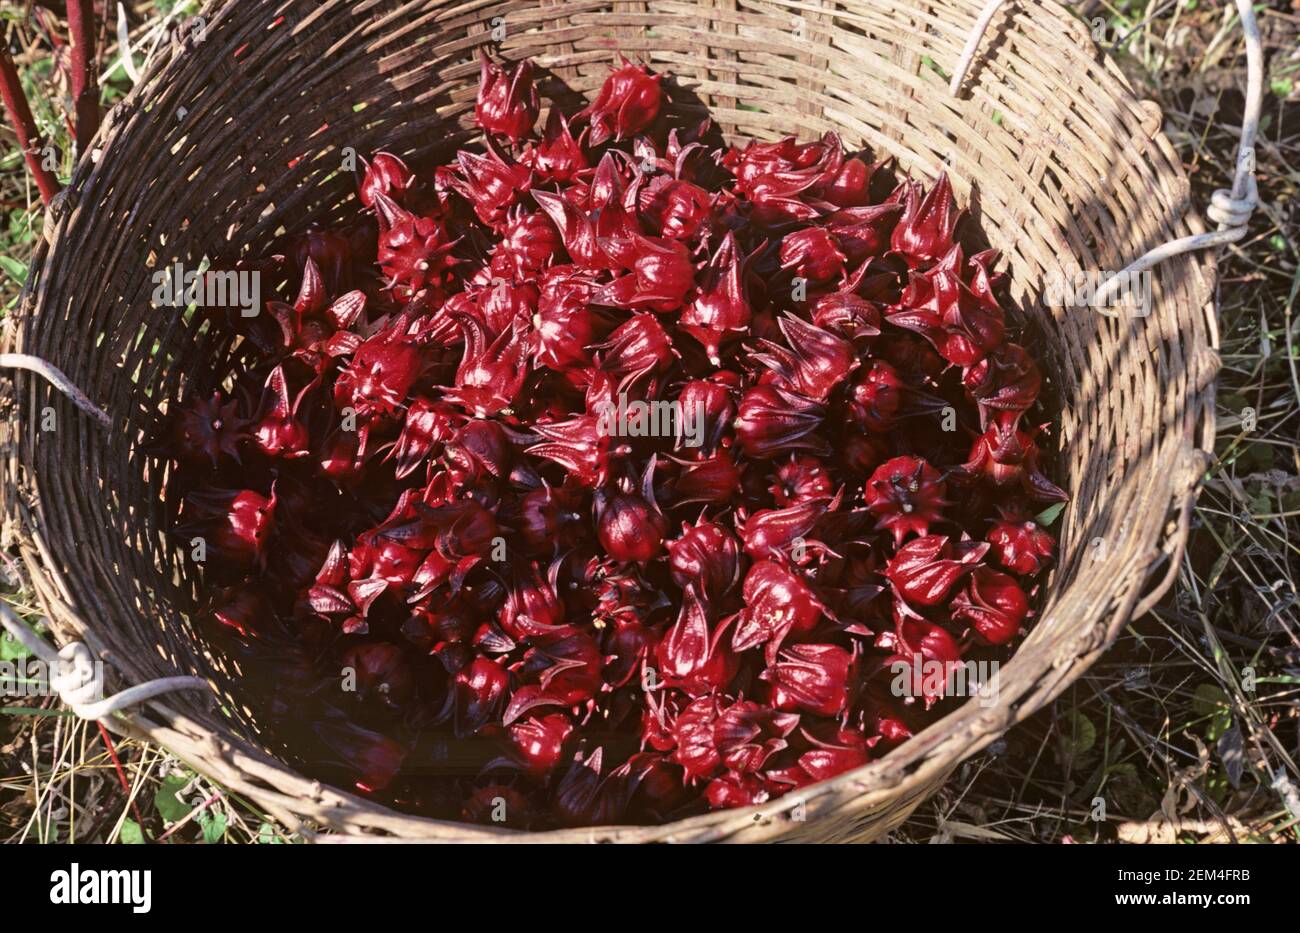 Harvested red okra or roselle (Hibiscus sabdariffa) fruit used in medicine, confectionery and tea making, Thailand Stock Photo